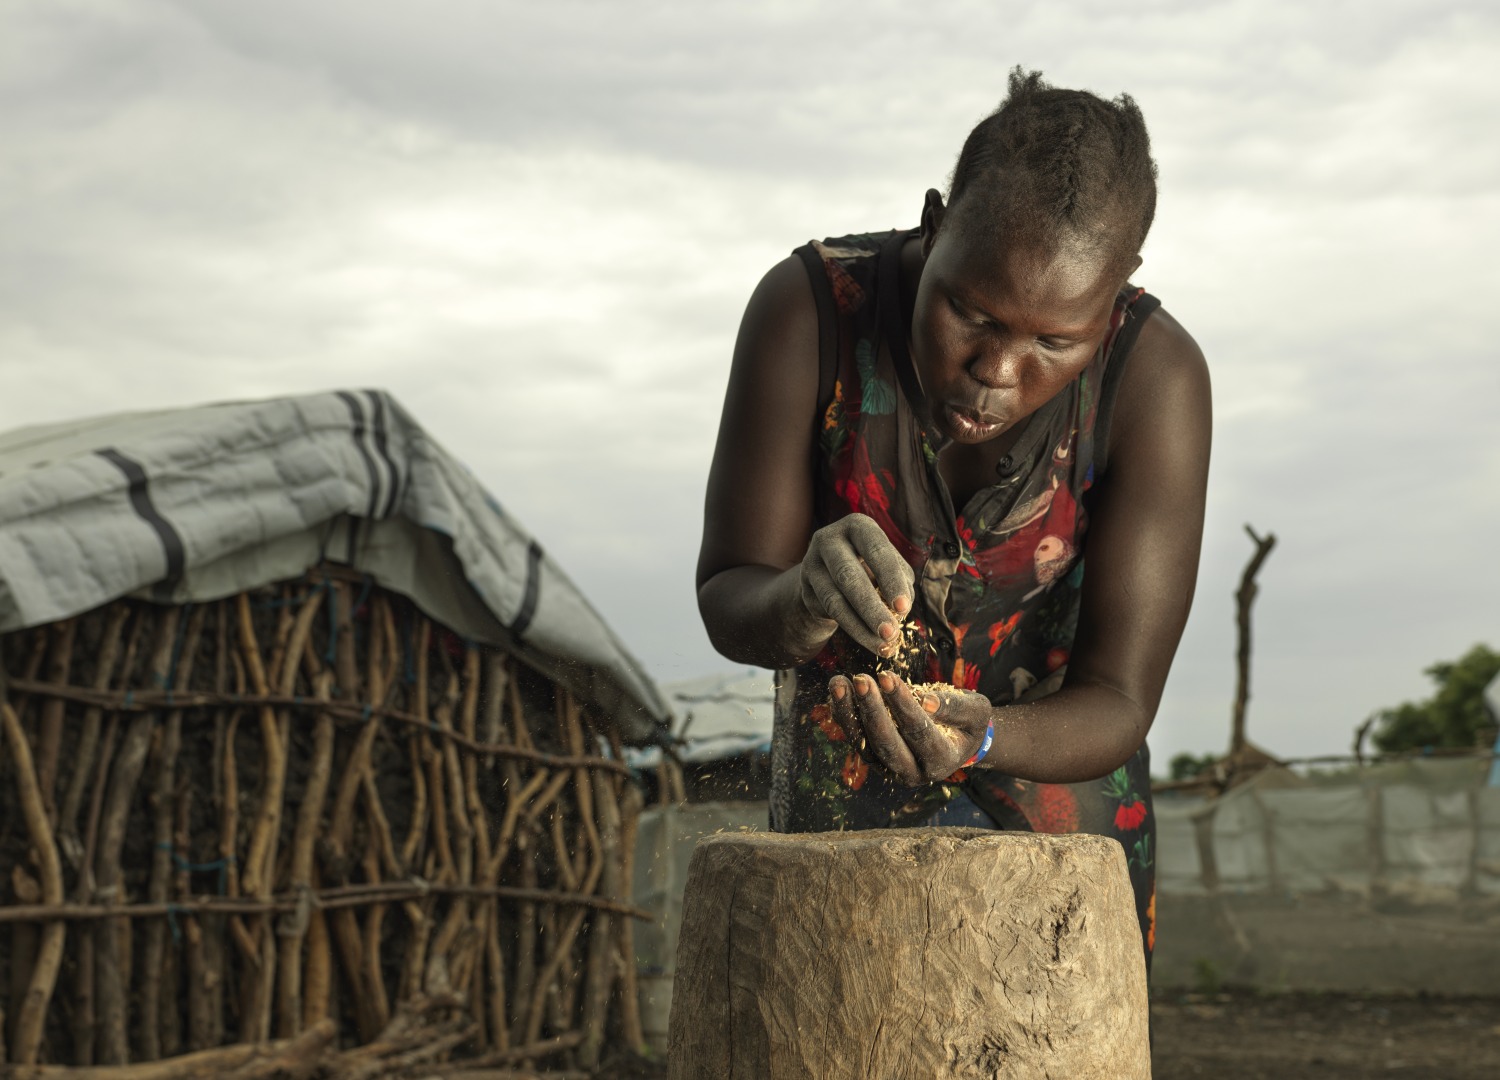 Nyakieth Kulang, 22, prepares the rice by sifting out the unwanted husk.